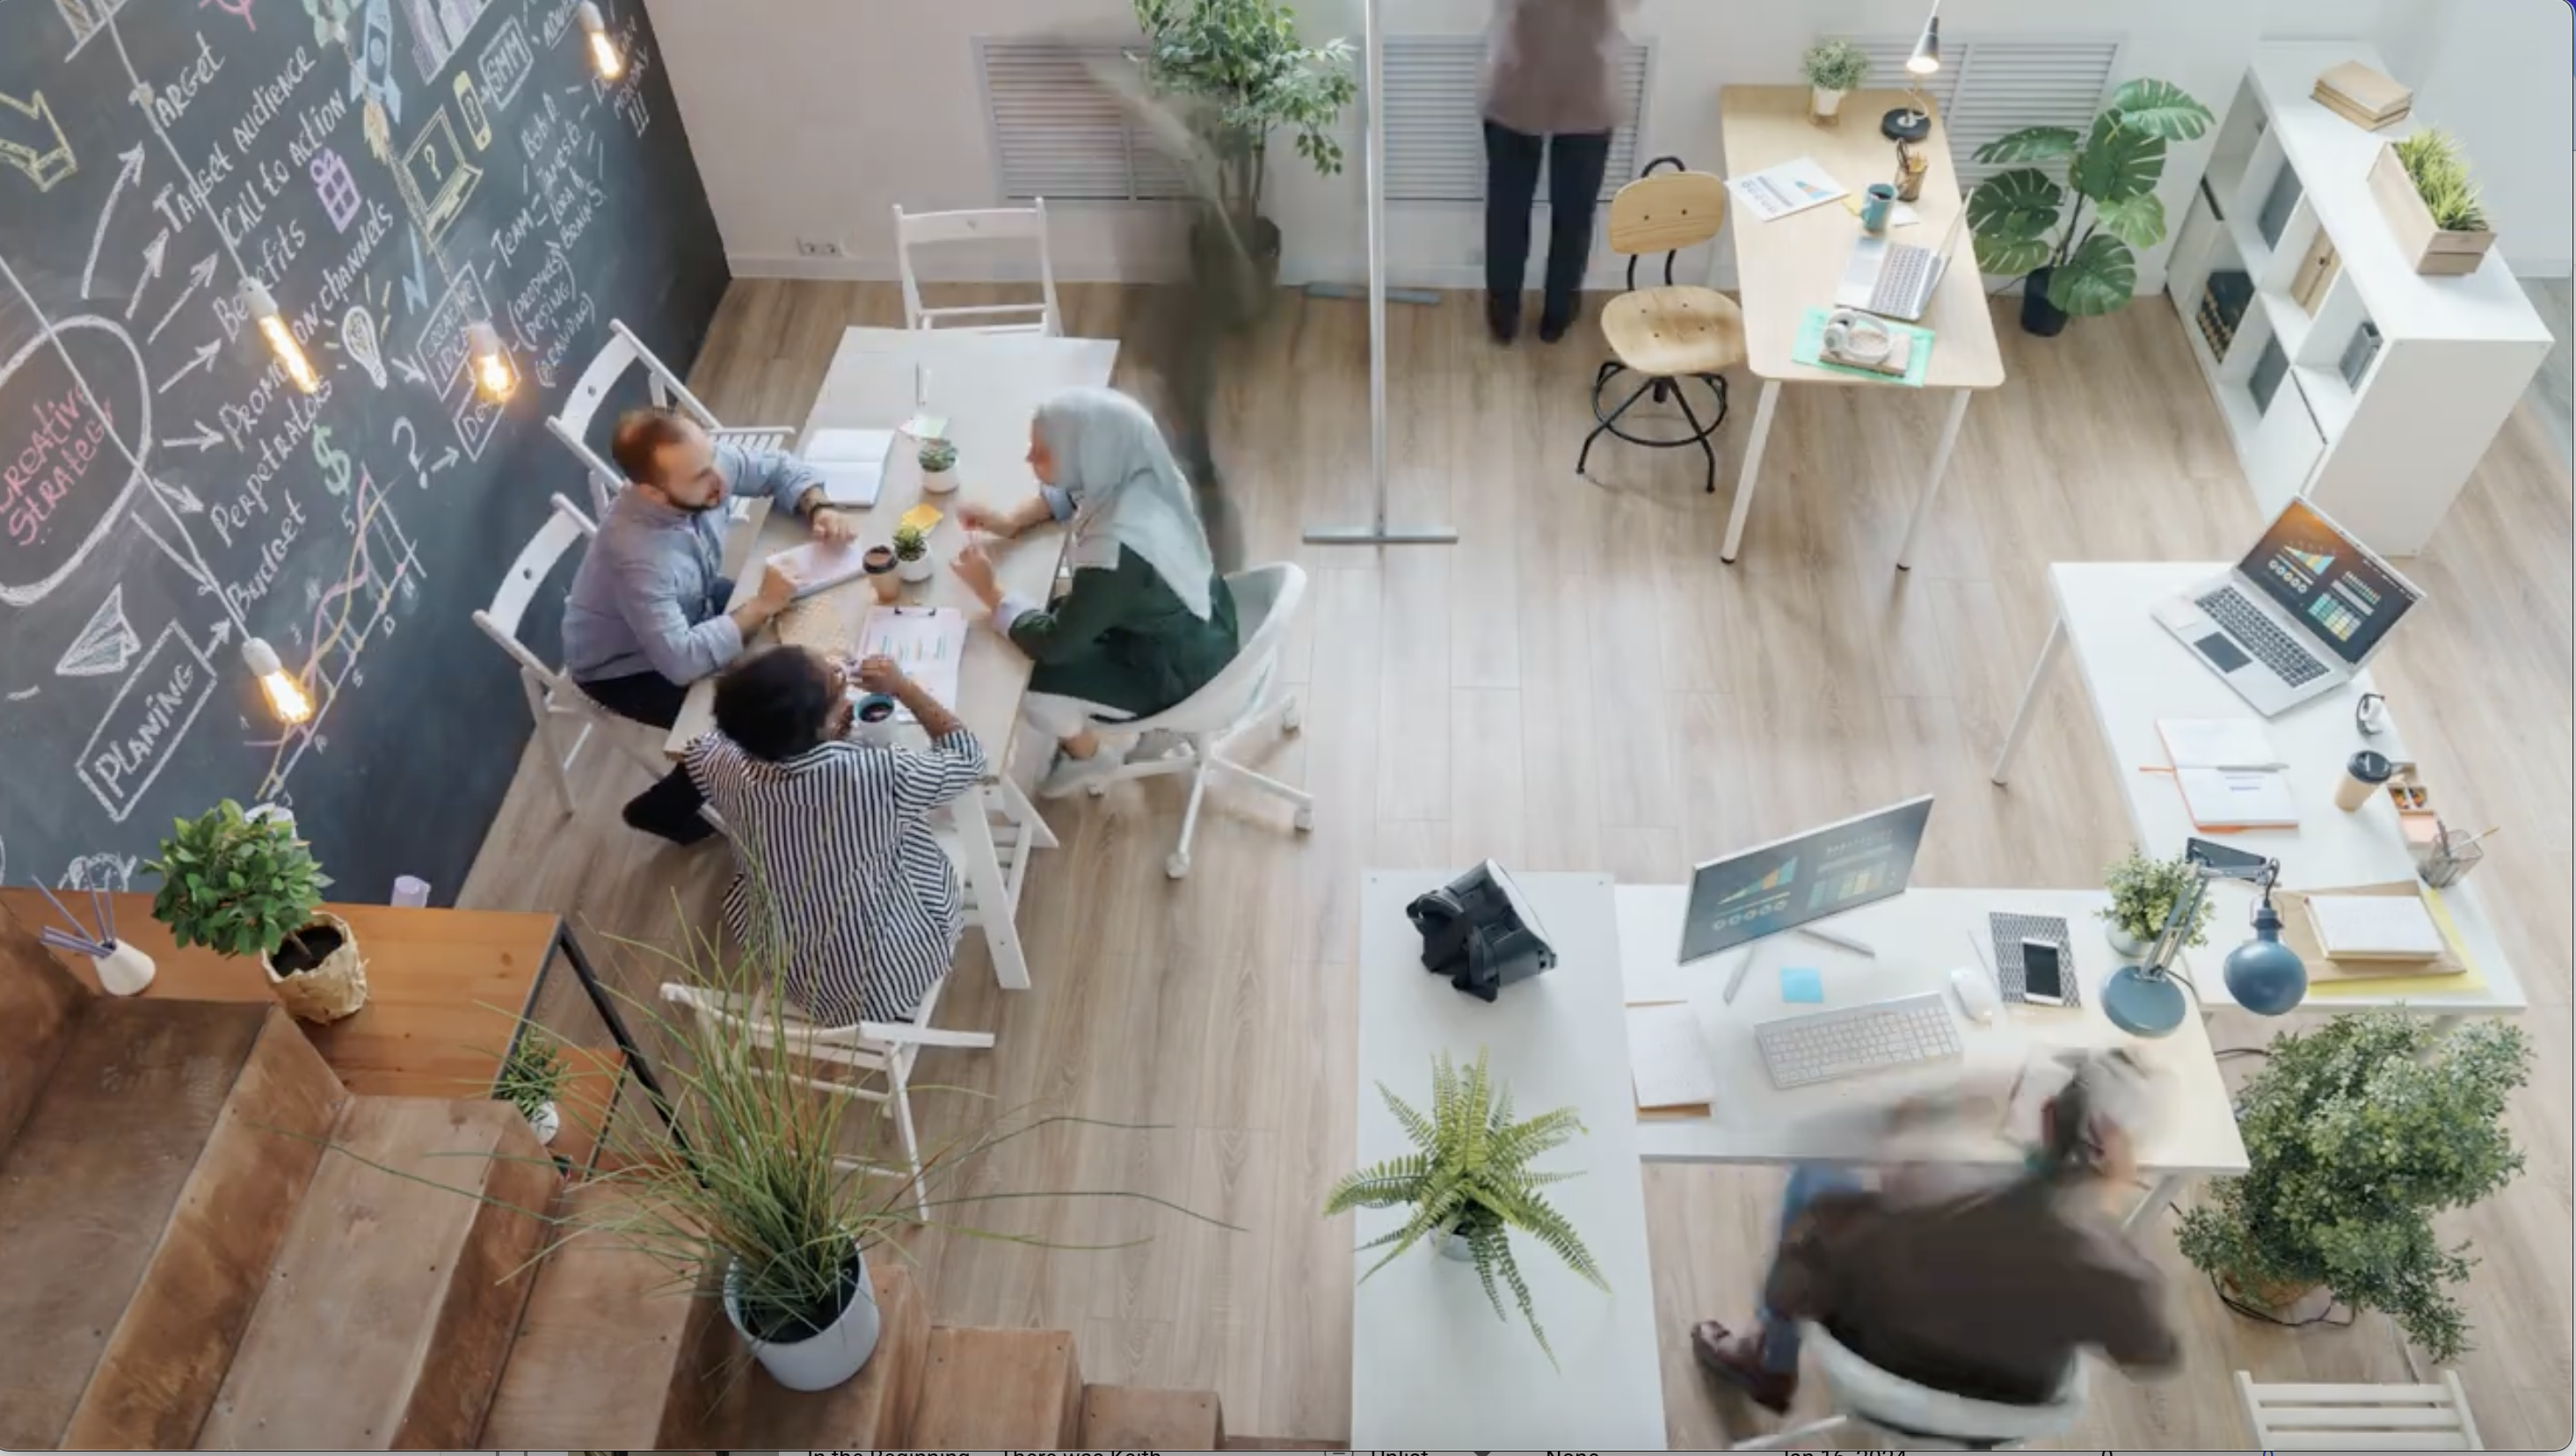 Overhead shot of people working in an airy office filled with plants